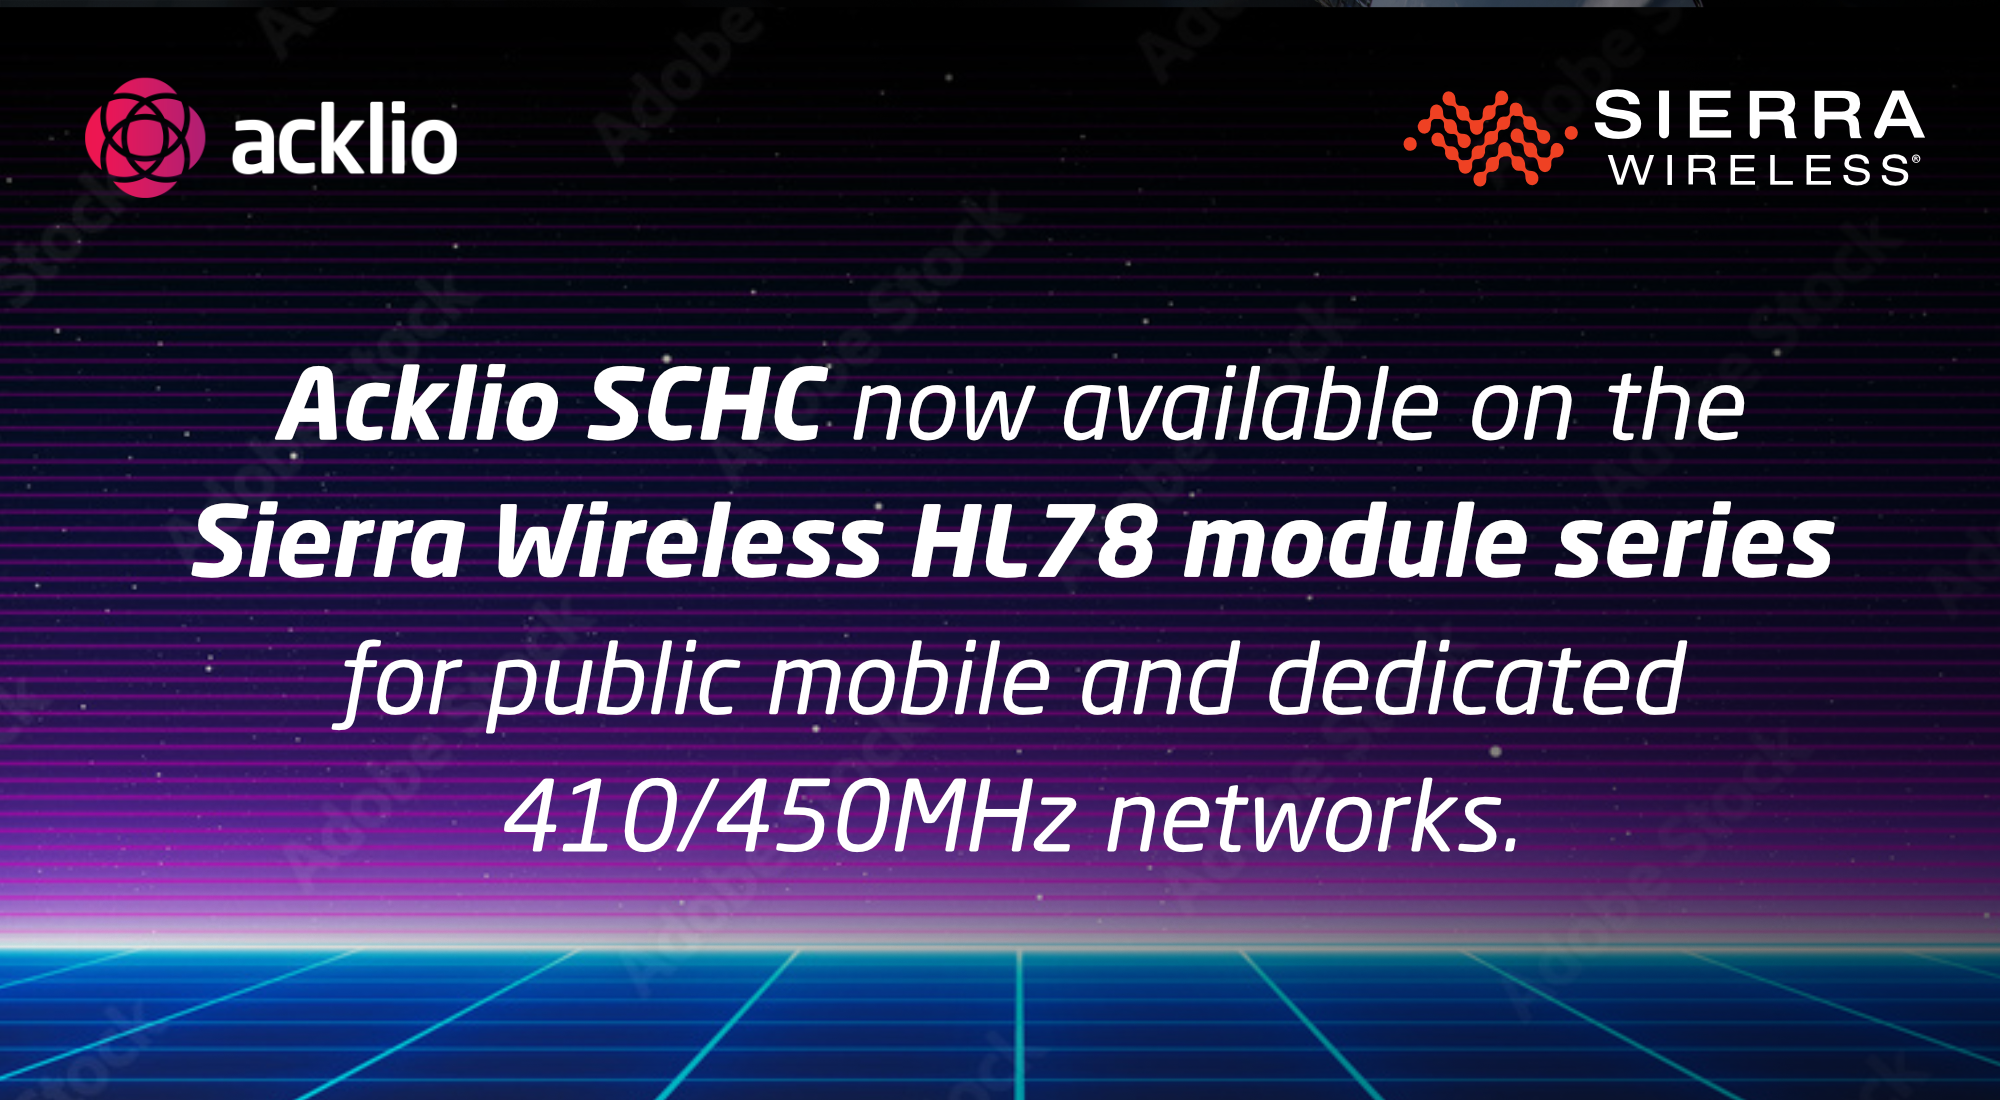 Acklio announces the general availability of its software stack on the Sierra Wireless HL78 module series for public mobile and dedicated 410/450MHz networks.